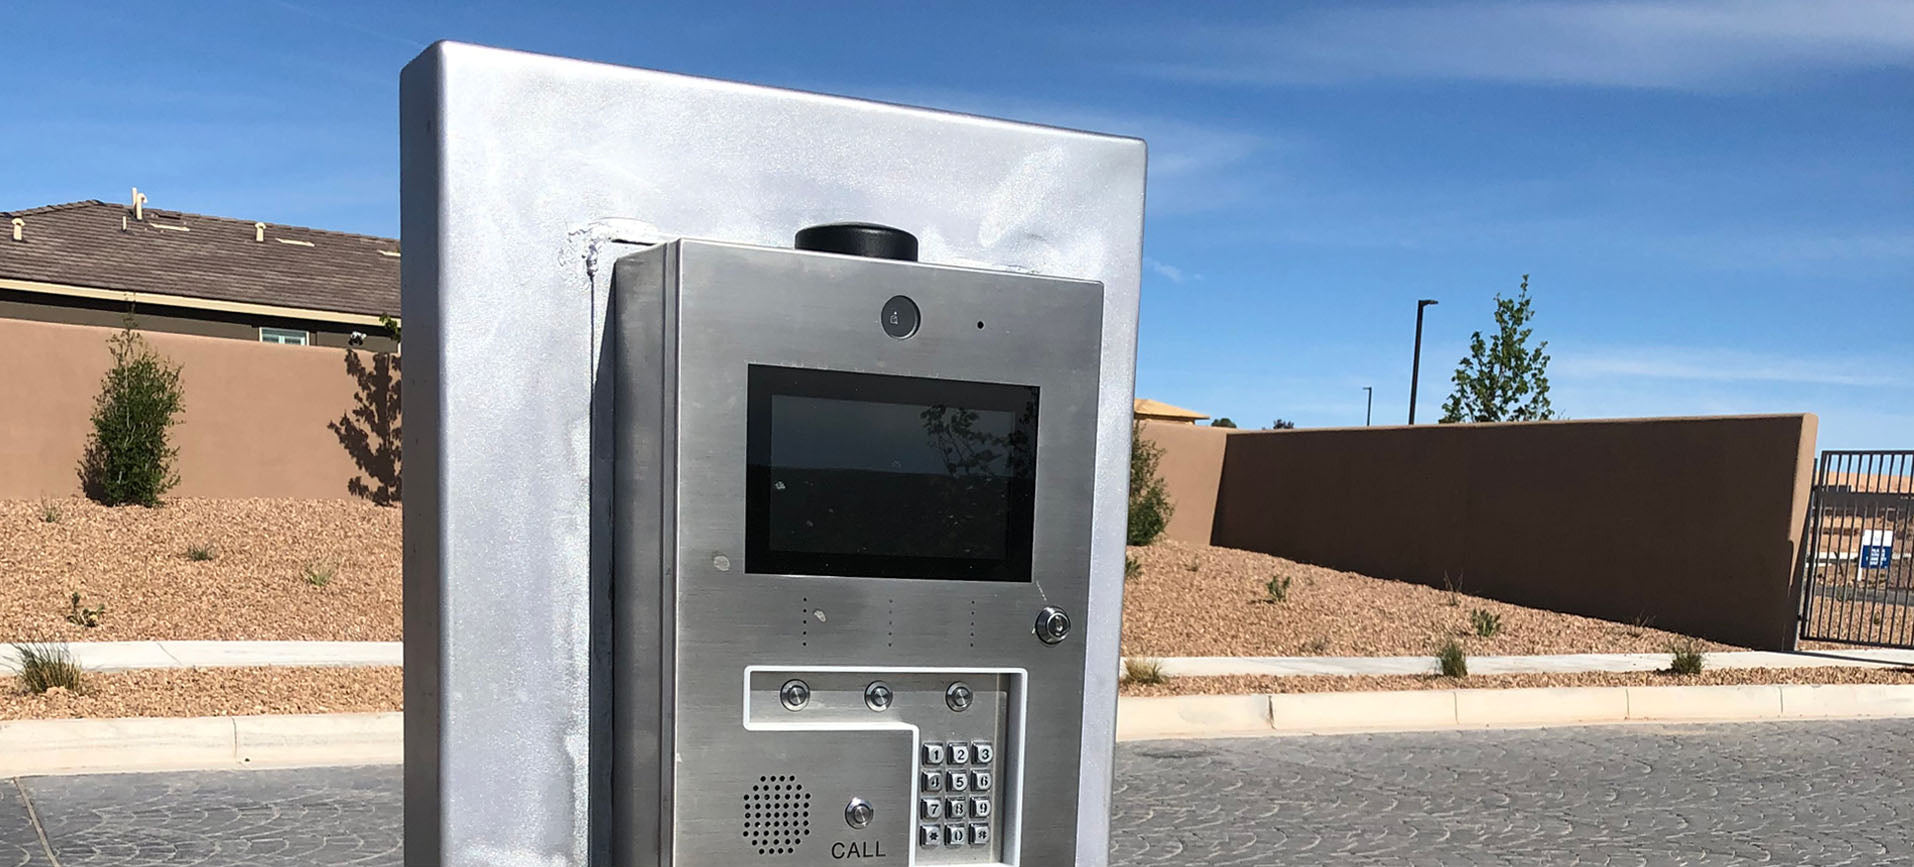 custom design stainless steel stand holds keypad and intercom gate opener at entrance to neighborhood